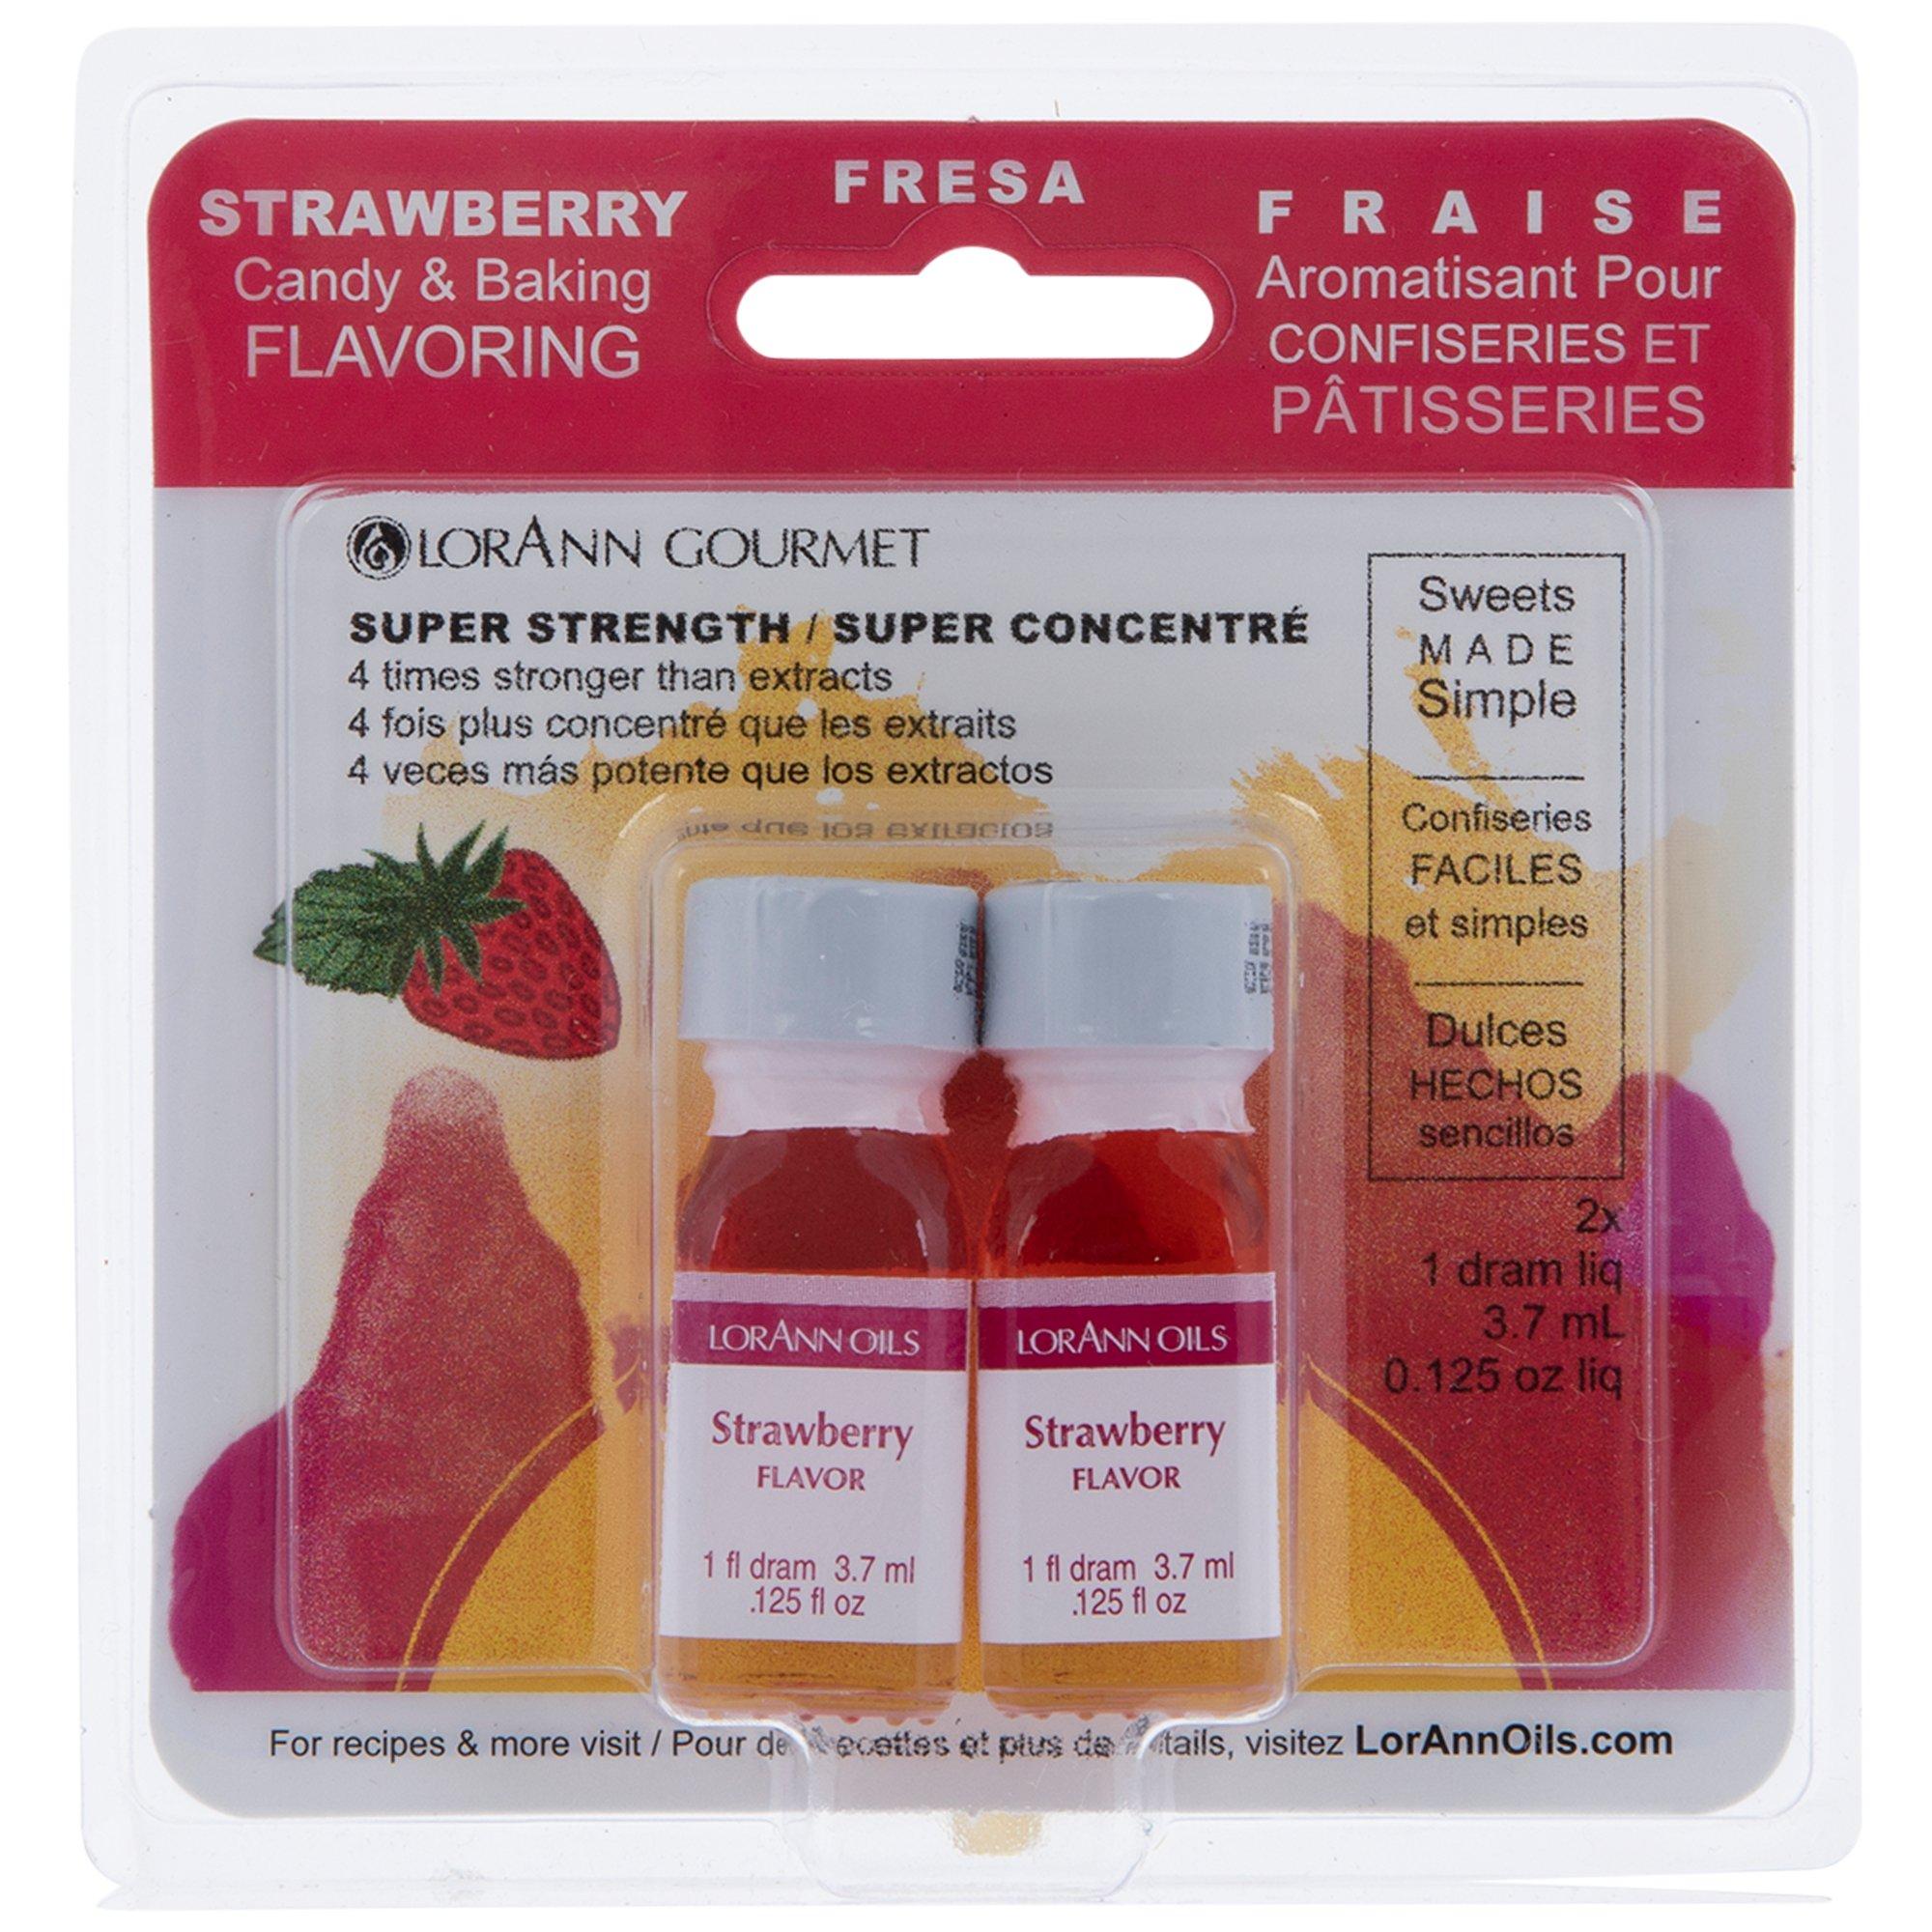  Dolce Foglia Strawberry Flavoring Oils - 1 Gallon Multipurpose  Flavoring Oil for Candy Making, Extracts and Flavorings for Baking, Lip  Balm, Ice Cream, Ultra Concentrated Ingredients : Grocery & Gourmet Food